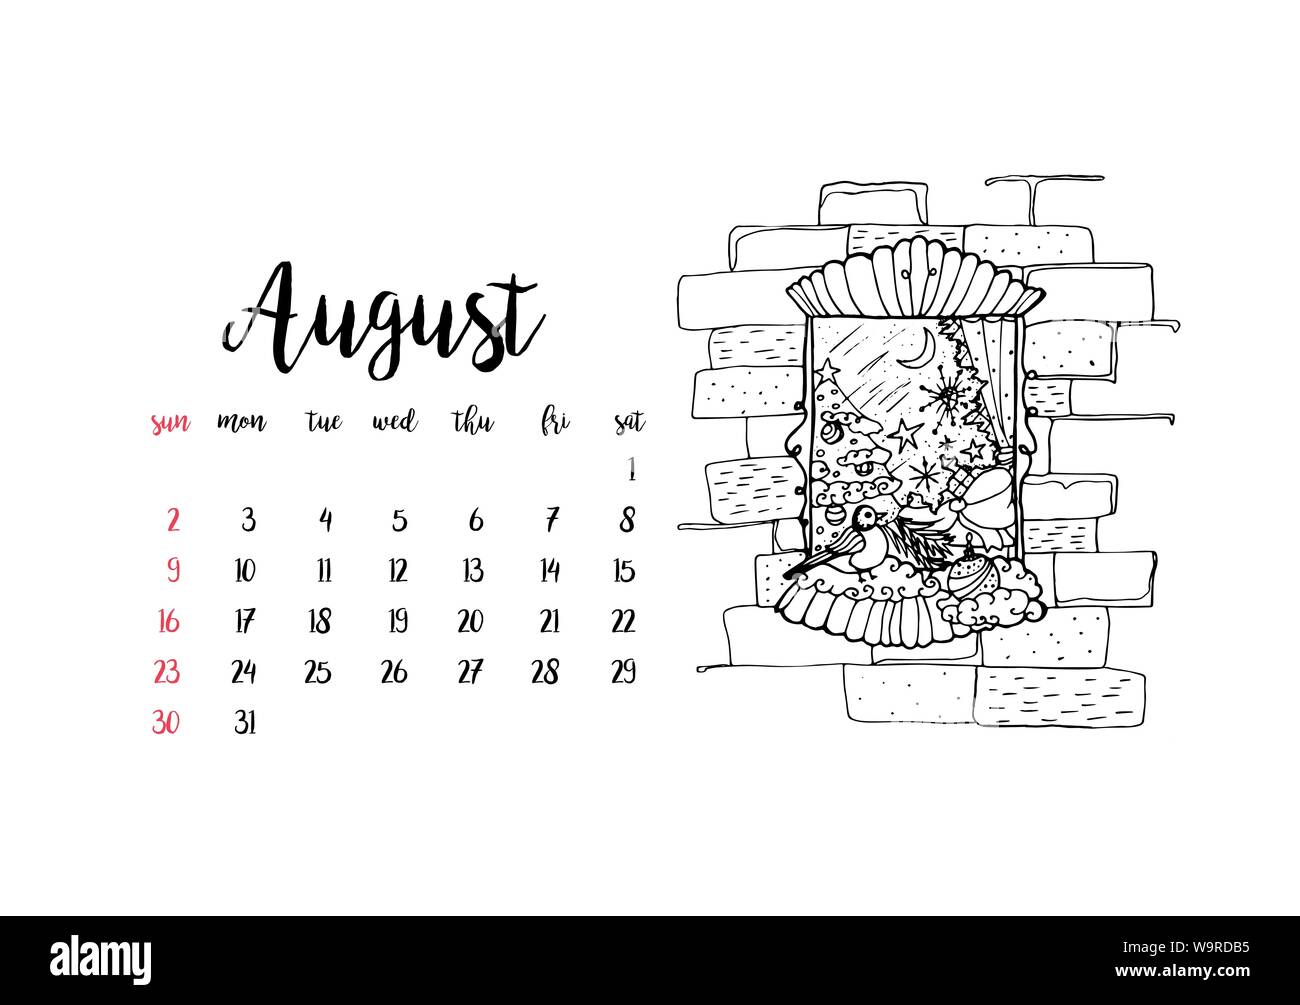 Monthly Desk Calendar Horizontal Template 2020 For Month August